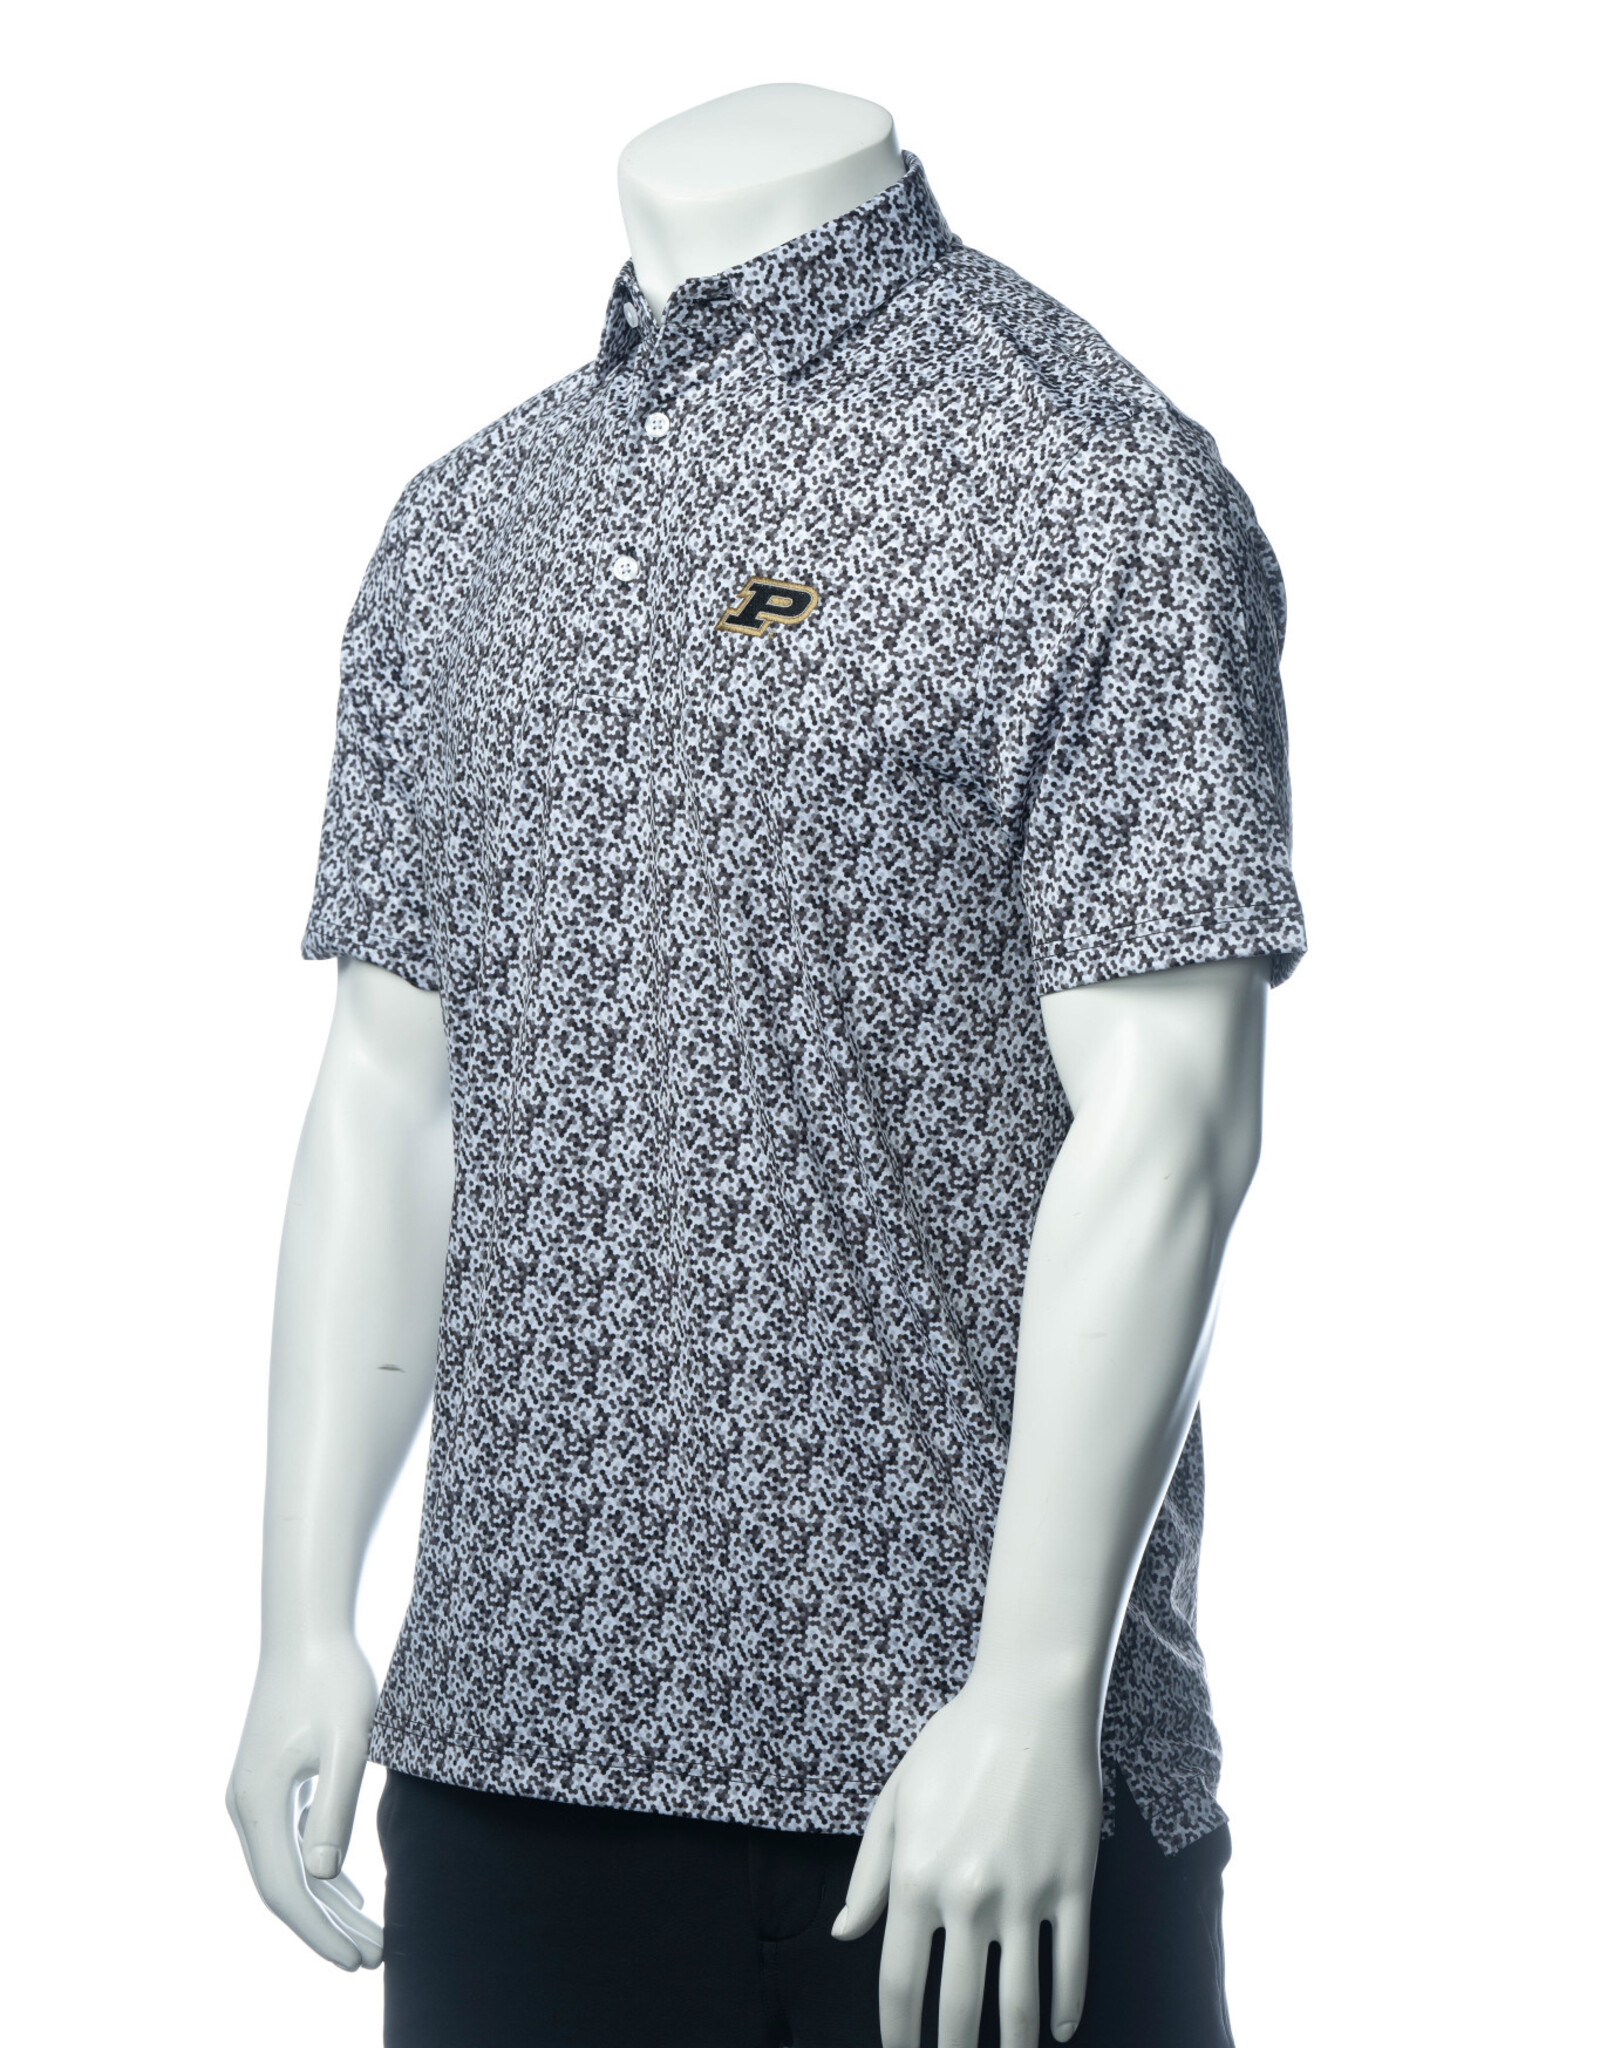 PURDUE COLLECTION PURDUE COLLECTION "THE 4K" POLO